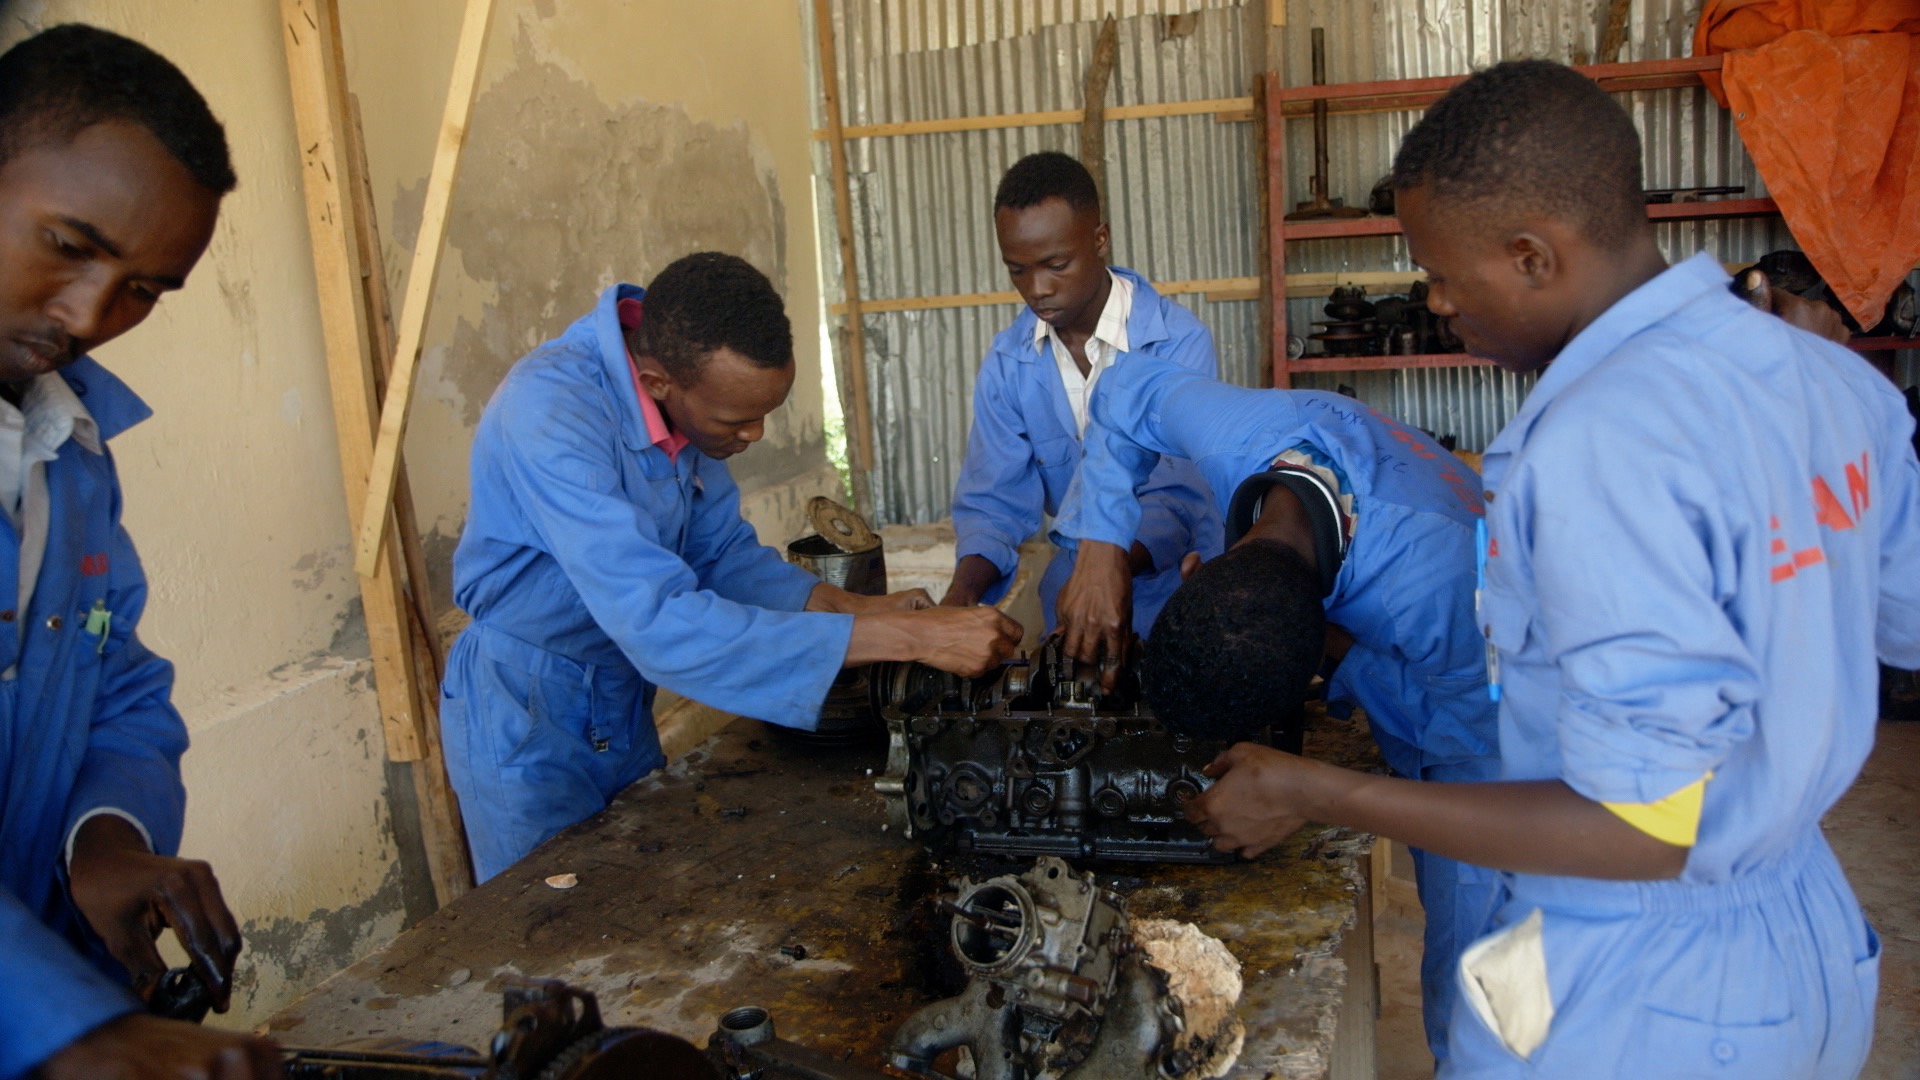 Former al Shabaab fighters learn work and life skills in a rehabilitation center.